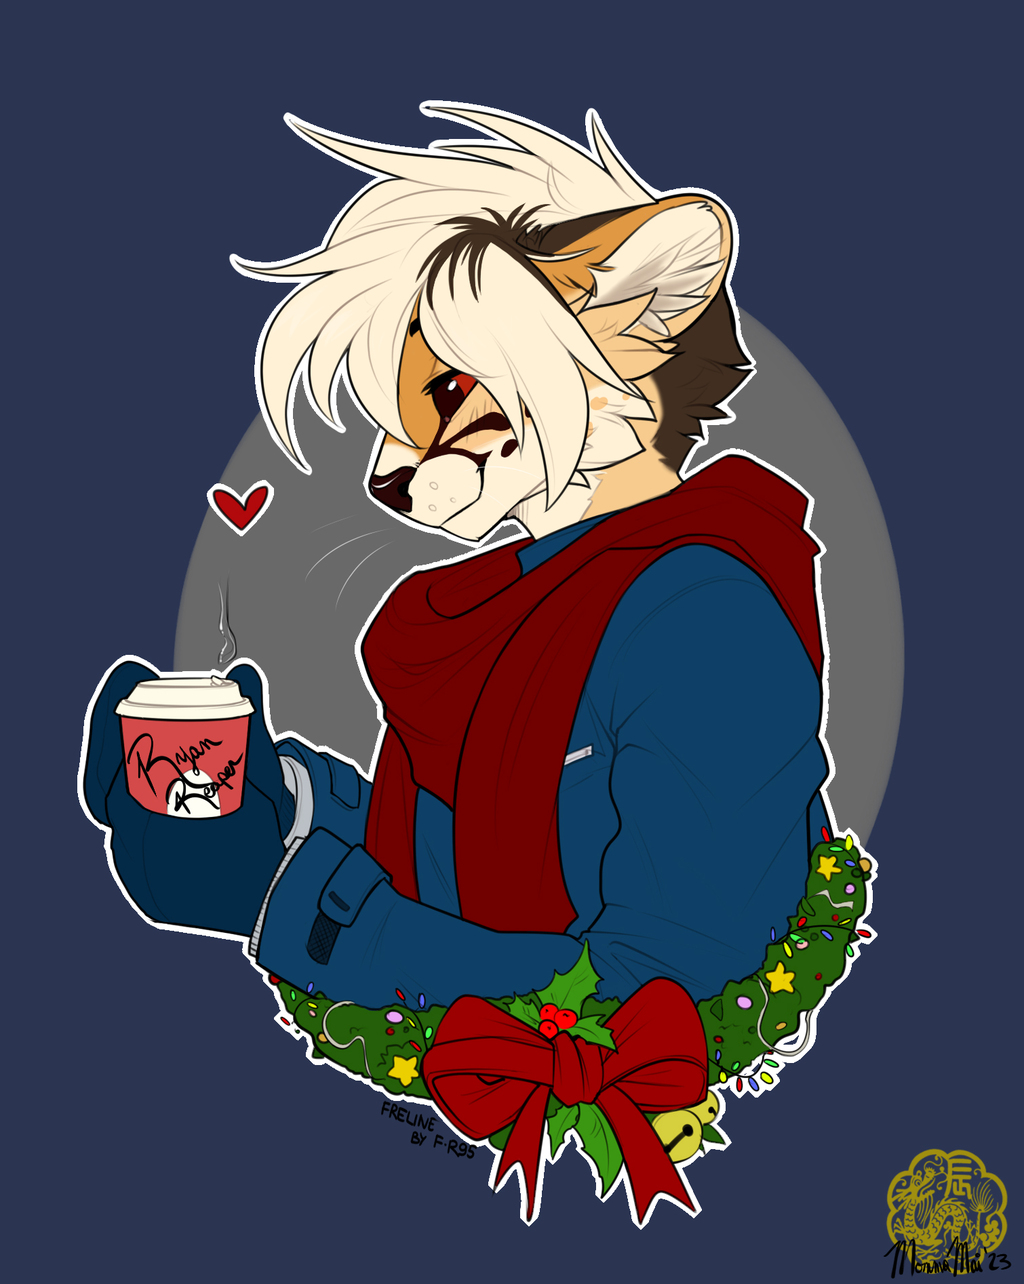 Most recent image: Ryan Reaper Christmas Wreath YCH